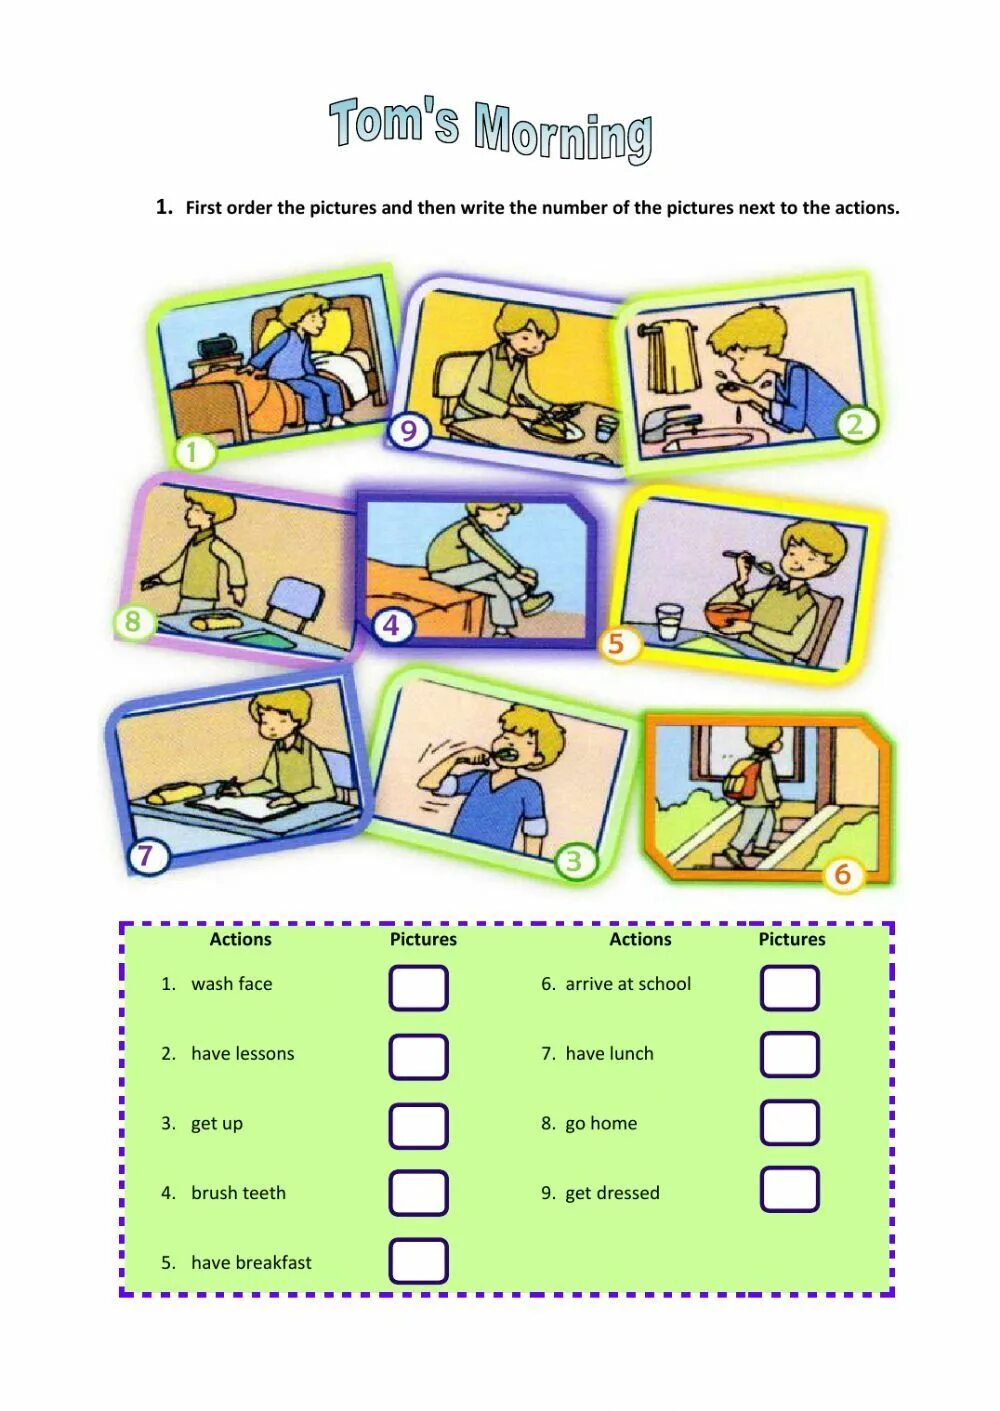 Routine exercises. Daily Routine задания на английском языке. Карточки Daily Routine for Kids. Daily activities Worksheets. Daily Routine Worksheets.